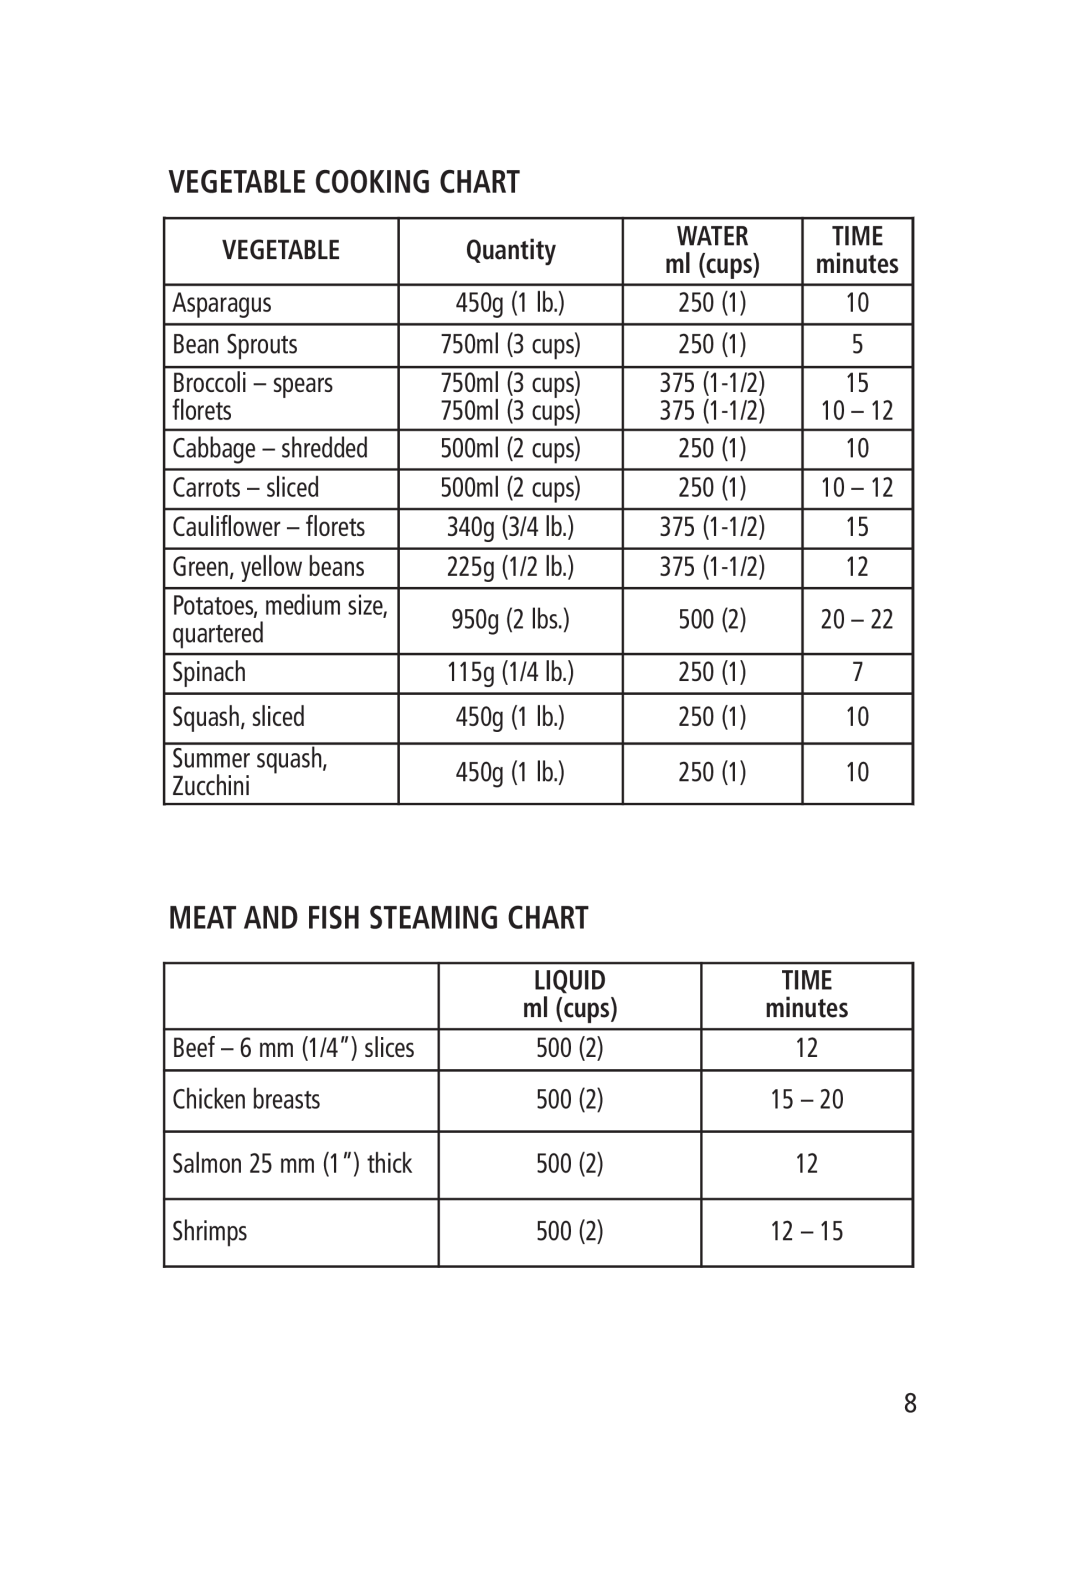 Salton RC-1203 manual Vegetable Cooking Chart, Meat And Fish Steaming Chart, Quantity, Water, Time, Liquid 